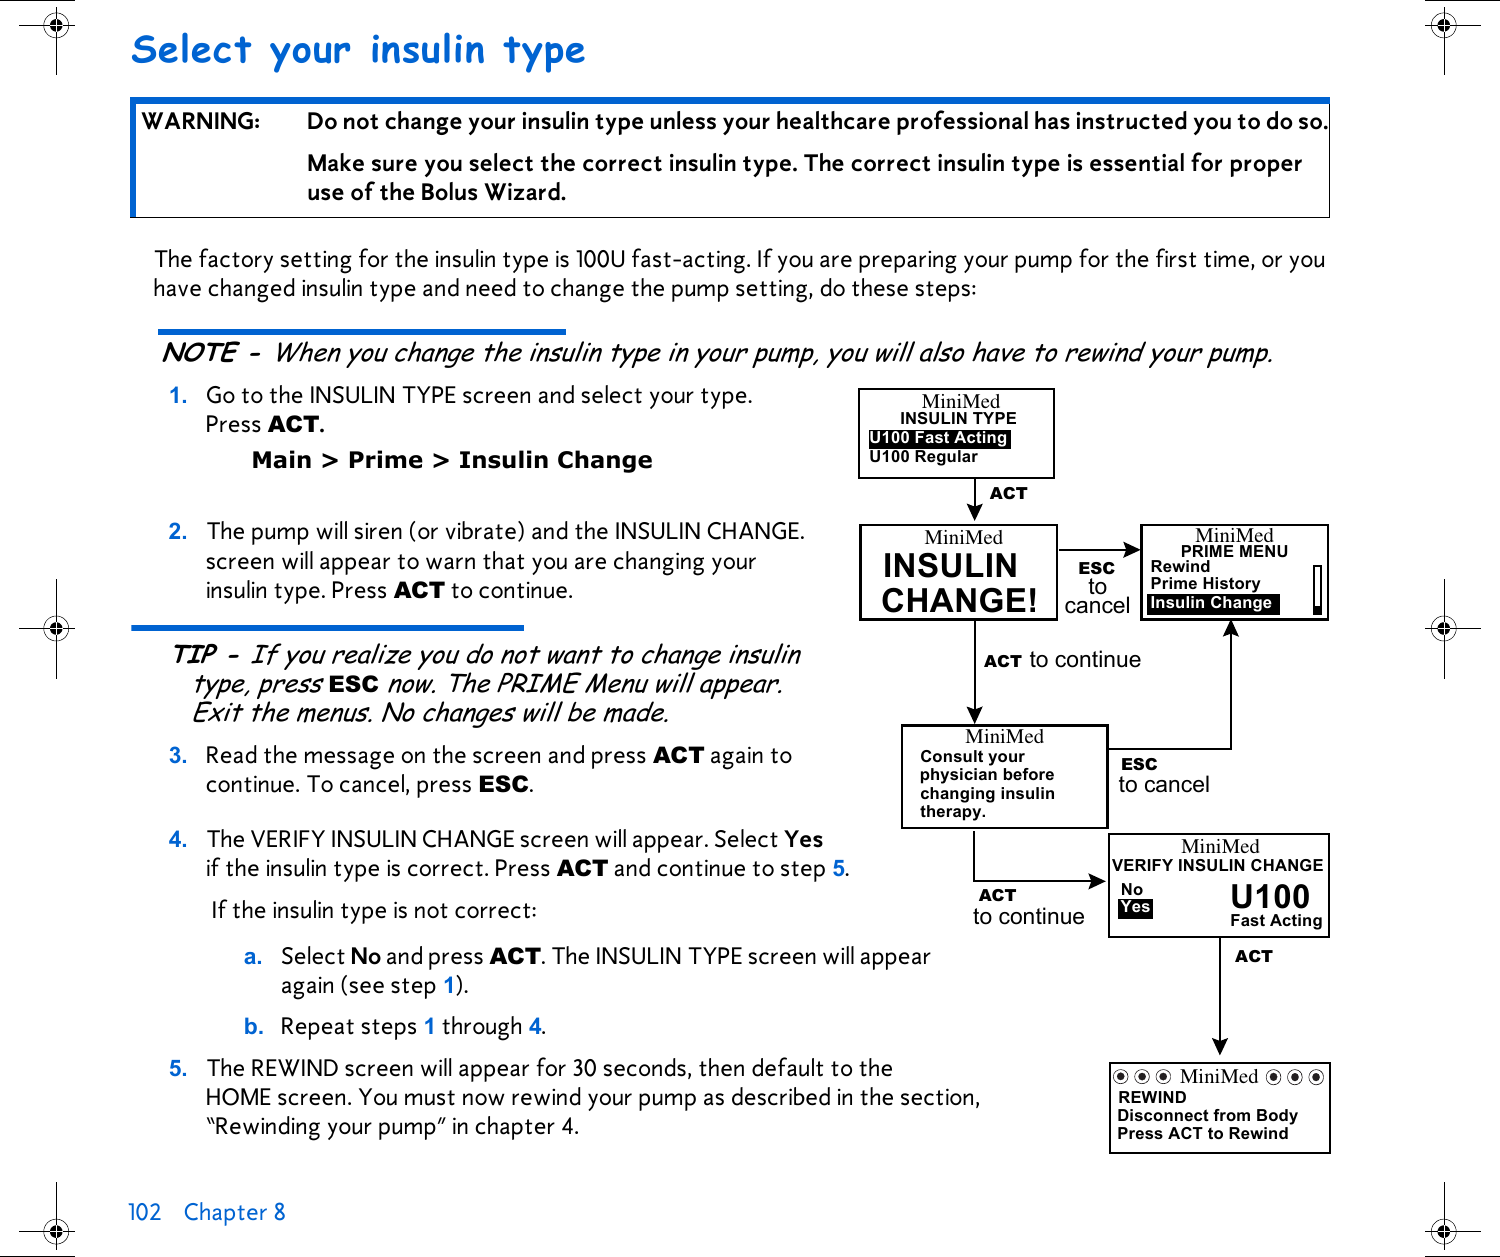 102 Chapter 8 Select your insulin typeThe factory setting for the insulin type is 100U fast-acting. If you are preparing your pump for the first time, or you have changed insulin type and need to change the pump setting, do these steps: NOTE - When you change the insulin type in your pump, you will also have to rewind your pump. 1. Go to the INSULIN TYPE screen and select your type. Press ACT. Main &gt; Prime &gt; Insulin Change2. The pump will siren (or vibrate) and the INSULIN CHANGE. screen will appear to warn that you are changing your insulin type. Press ACT to continue.TIP - If you realize you do not want to change insulin type, press ESC now. The PRIME Menu will appear. Exit the menus. No changes will be made.3. Read the message on the screen and press ACT again to continue. To cancel, press ESC.4. The VERIFY INSULIN CHANGE screen will appear. Select Yes if the insulin type is correct. Press ACT and continue to step 5. If the insulin type is not correct:a. Select No and press ACT. The INSULIN TYPE screen will appear again (see step 1).b. Repeat steps 1 through 4.5. The REWIND screen will appear for 30 seconds, then default to the HOME screen. You must now rewind your pump as described in the section, “Rewinding your pump” in chapter 4. WARNING: Do not change your insulin type unless your healthcare professional has instructed you to do so.Make sure you select the correct insulin type. The correct insulin type is essential for proper use of the Bolus Wizard.MiniMedINSULIN TYPEU100 RegularU100 Fast ActingACTMiniMedINSULINACTCHANGE!MiniMedPRIME MENUESC RewindPrime HistoryInsulin Change to cancel to continueMiniMedConsult yourchanging insulintherapy.ESC to cancelphysician beforeACTVERIFY INSULIN CHANGEYes U100NoFast ActingACT to continueMiniMedREWINDDisconnect from BodyPress ACT to RewindMiniMed